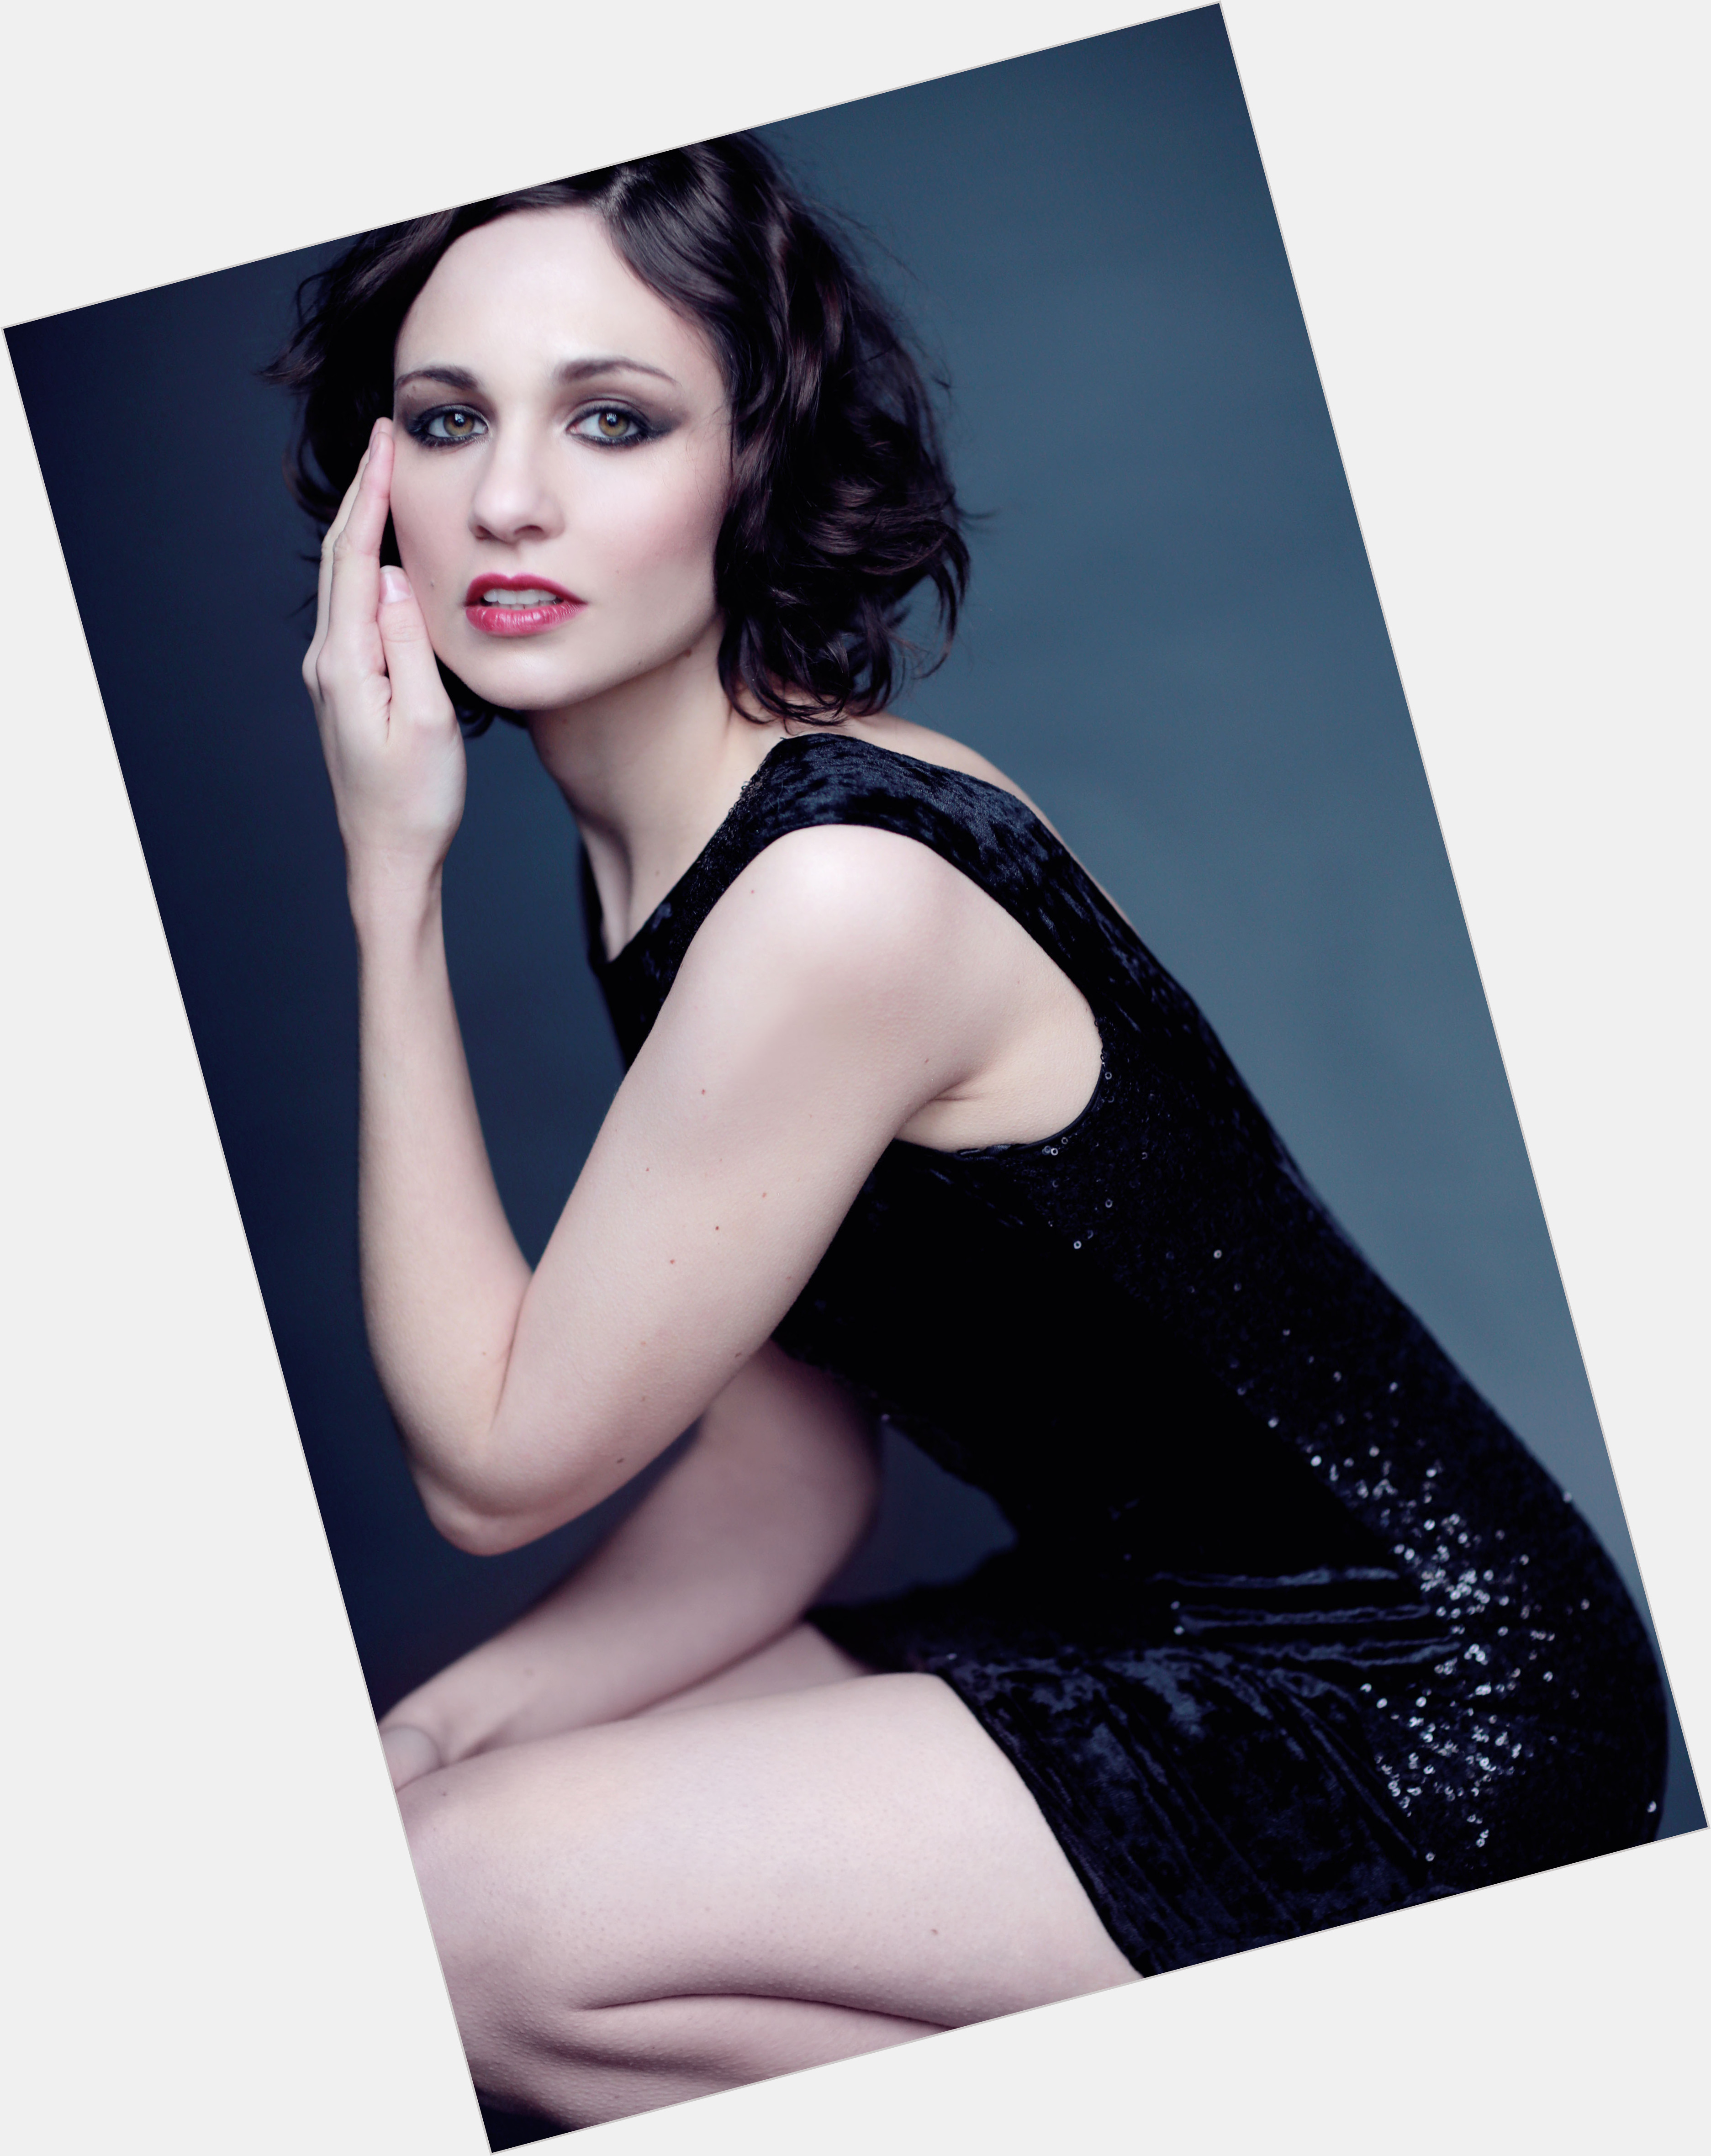 <a href="/hot-women/tuppence-middleton/where-dating-news-photos">Tuppence Middleton</a> Slim body,  dark brown hair & hairstyles